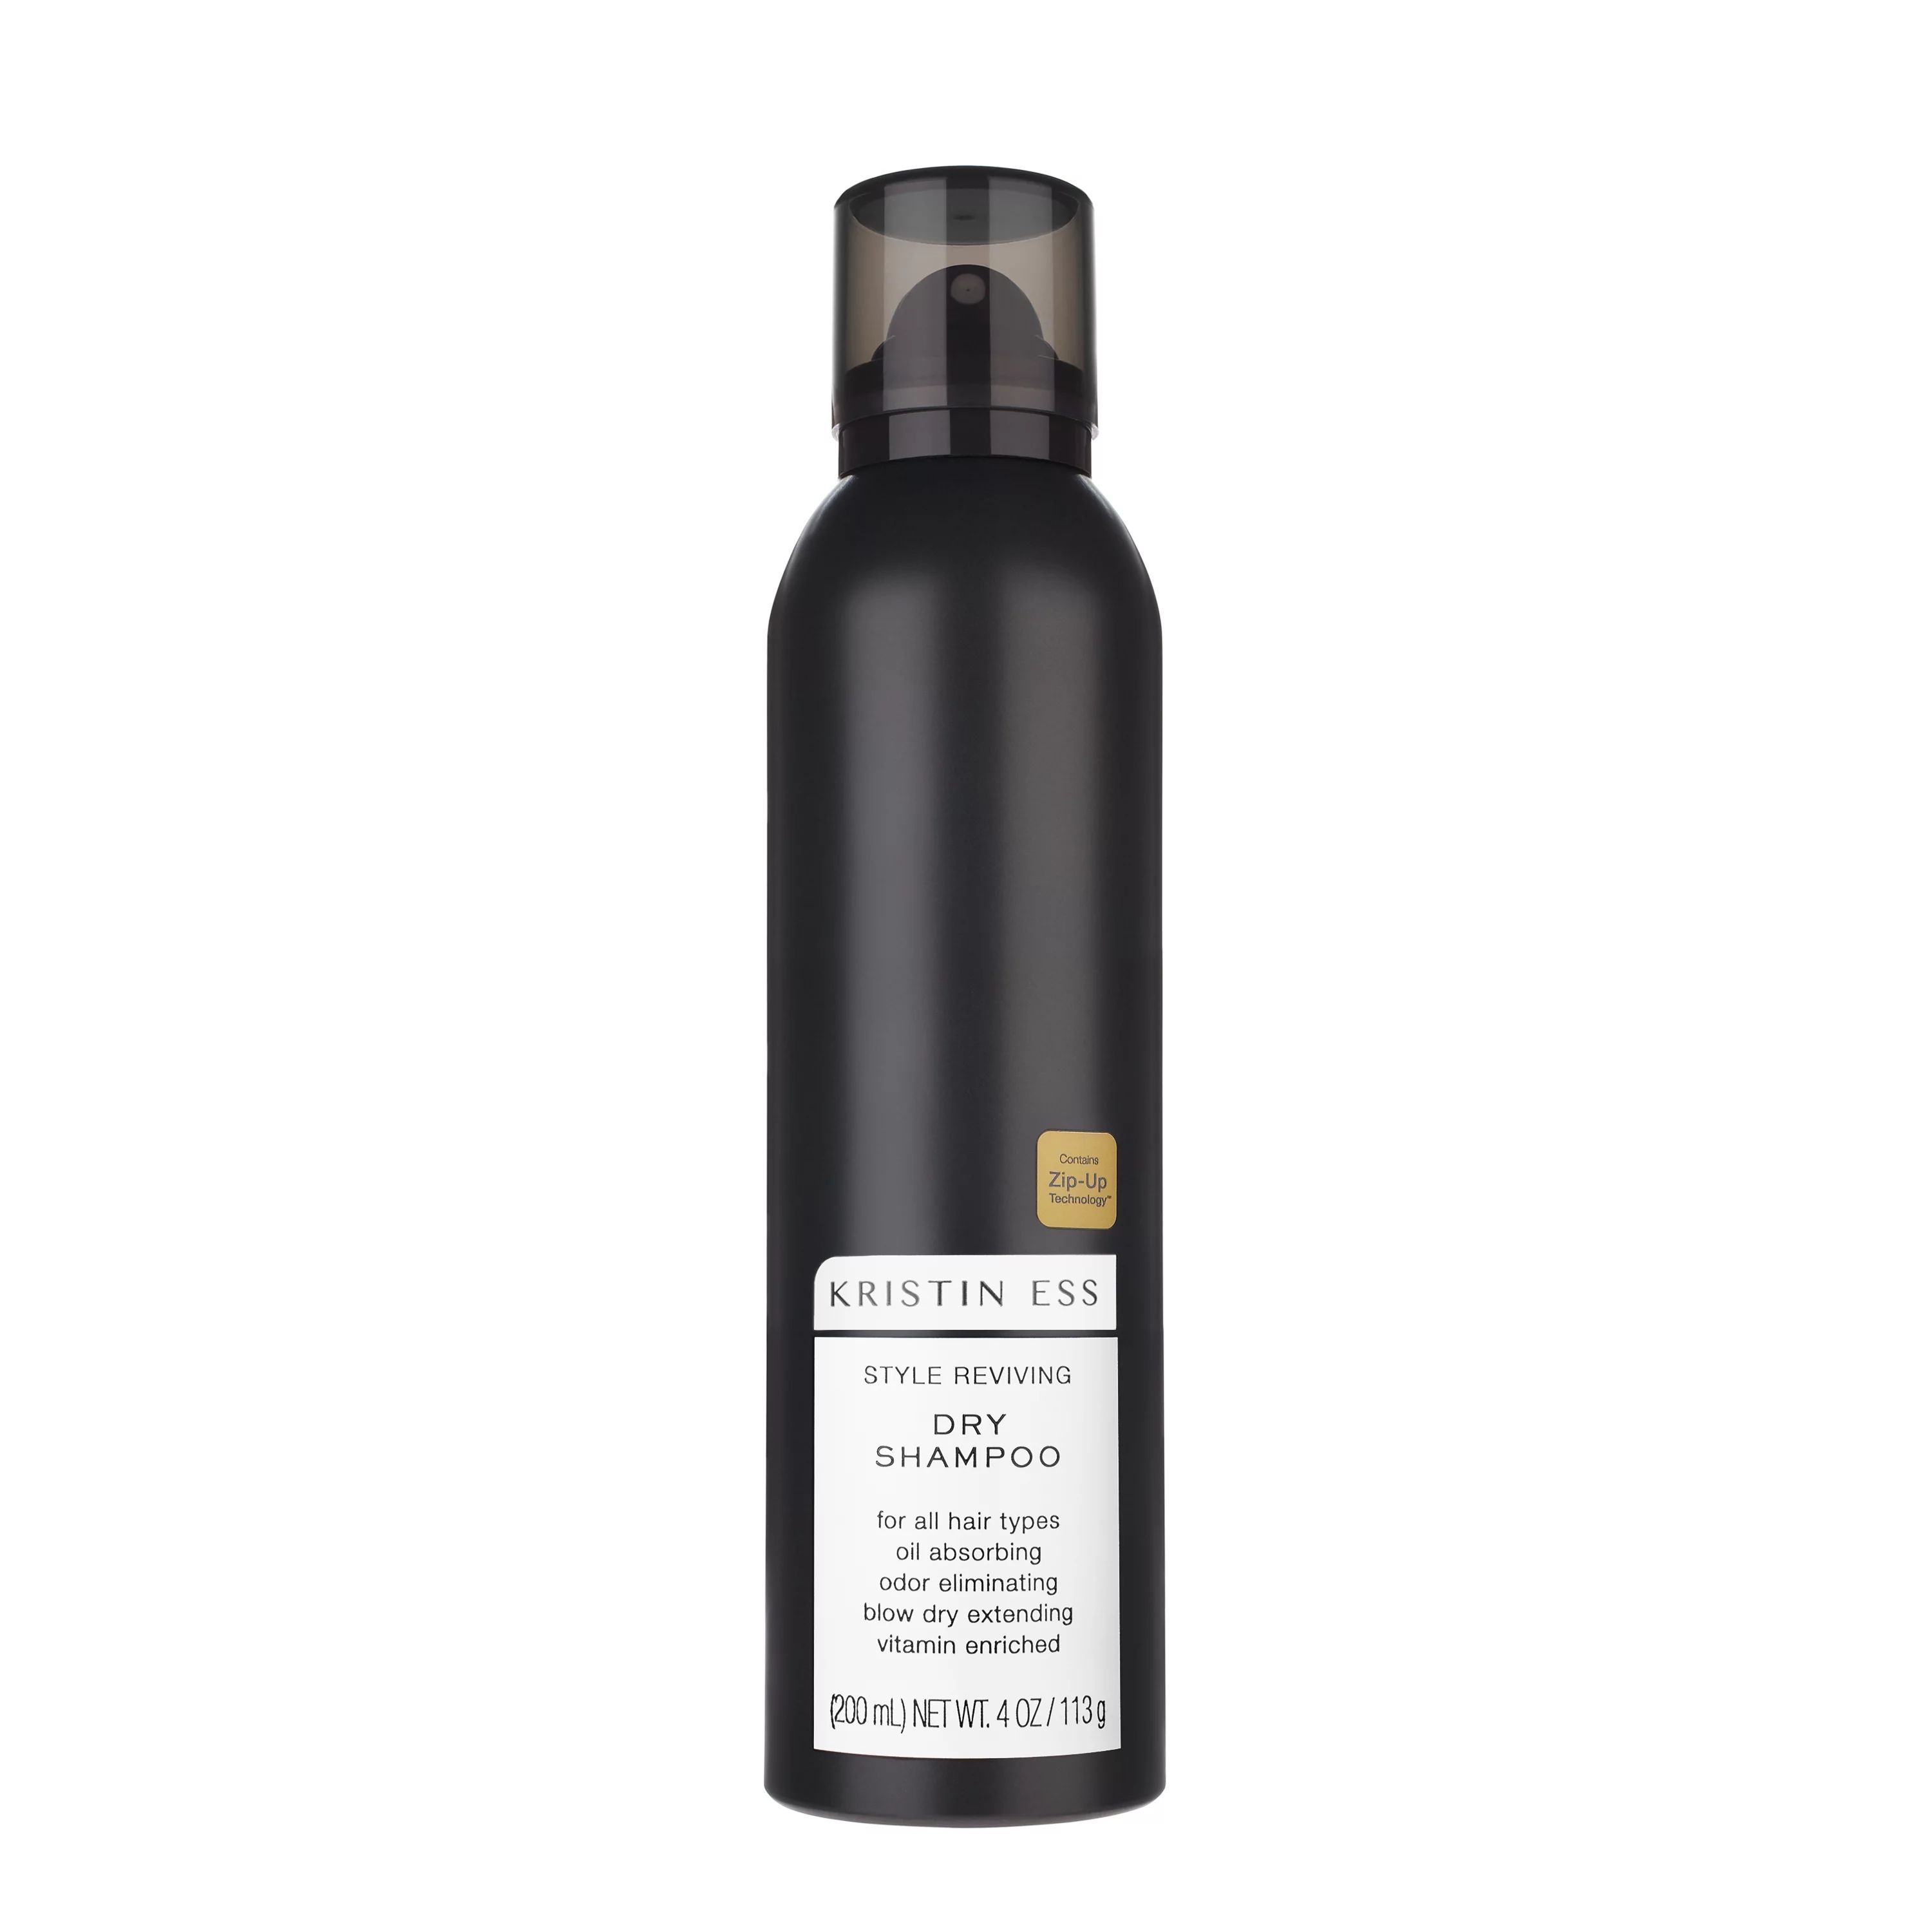 Kristin Ess Hair Style Reviving Dry Shampoo for Oily Hair with Vitamin C, Absorbs Oil + Odors, Dr... | Walmart (US)